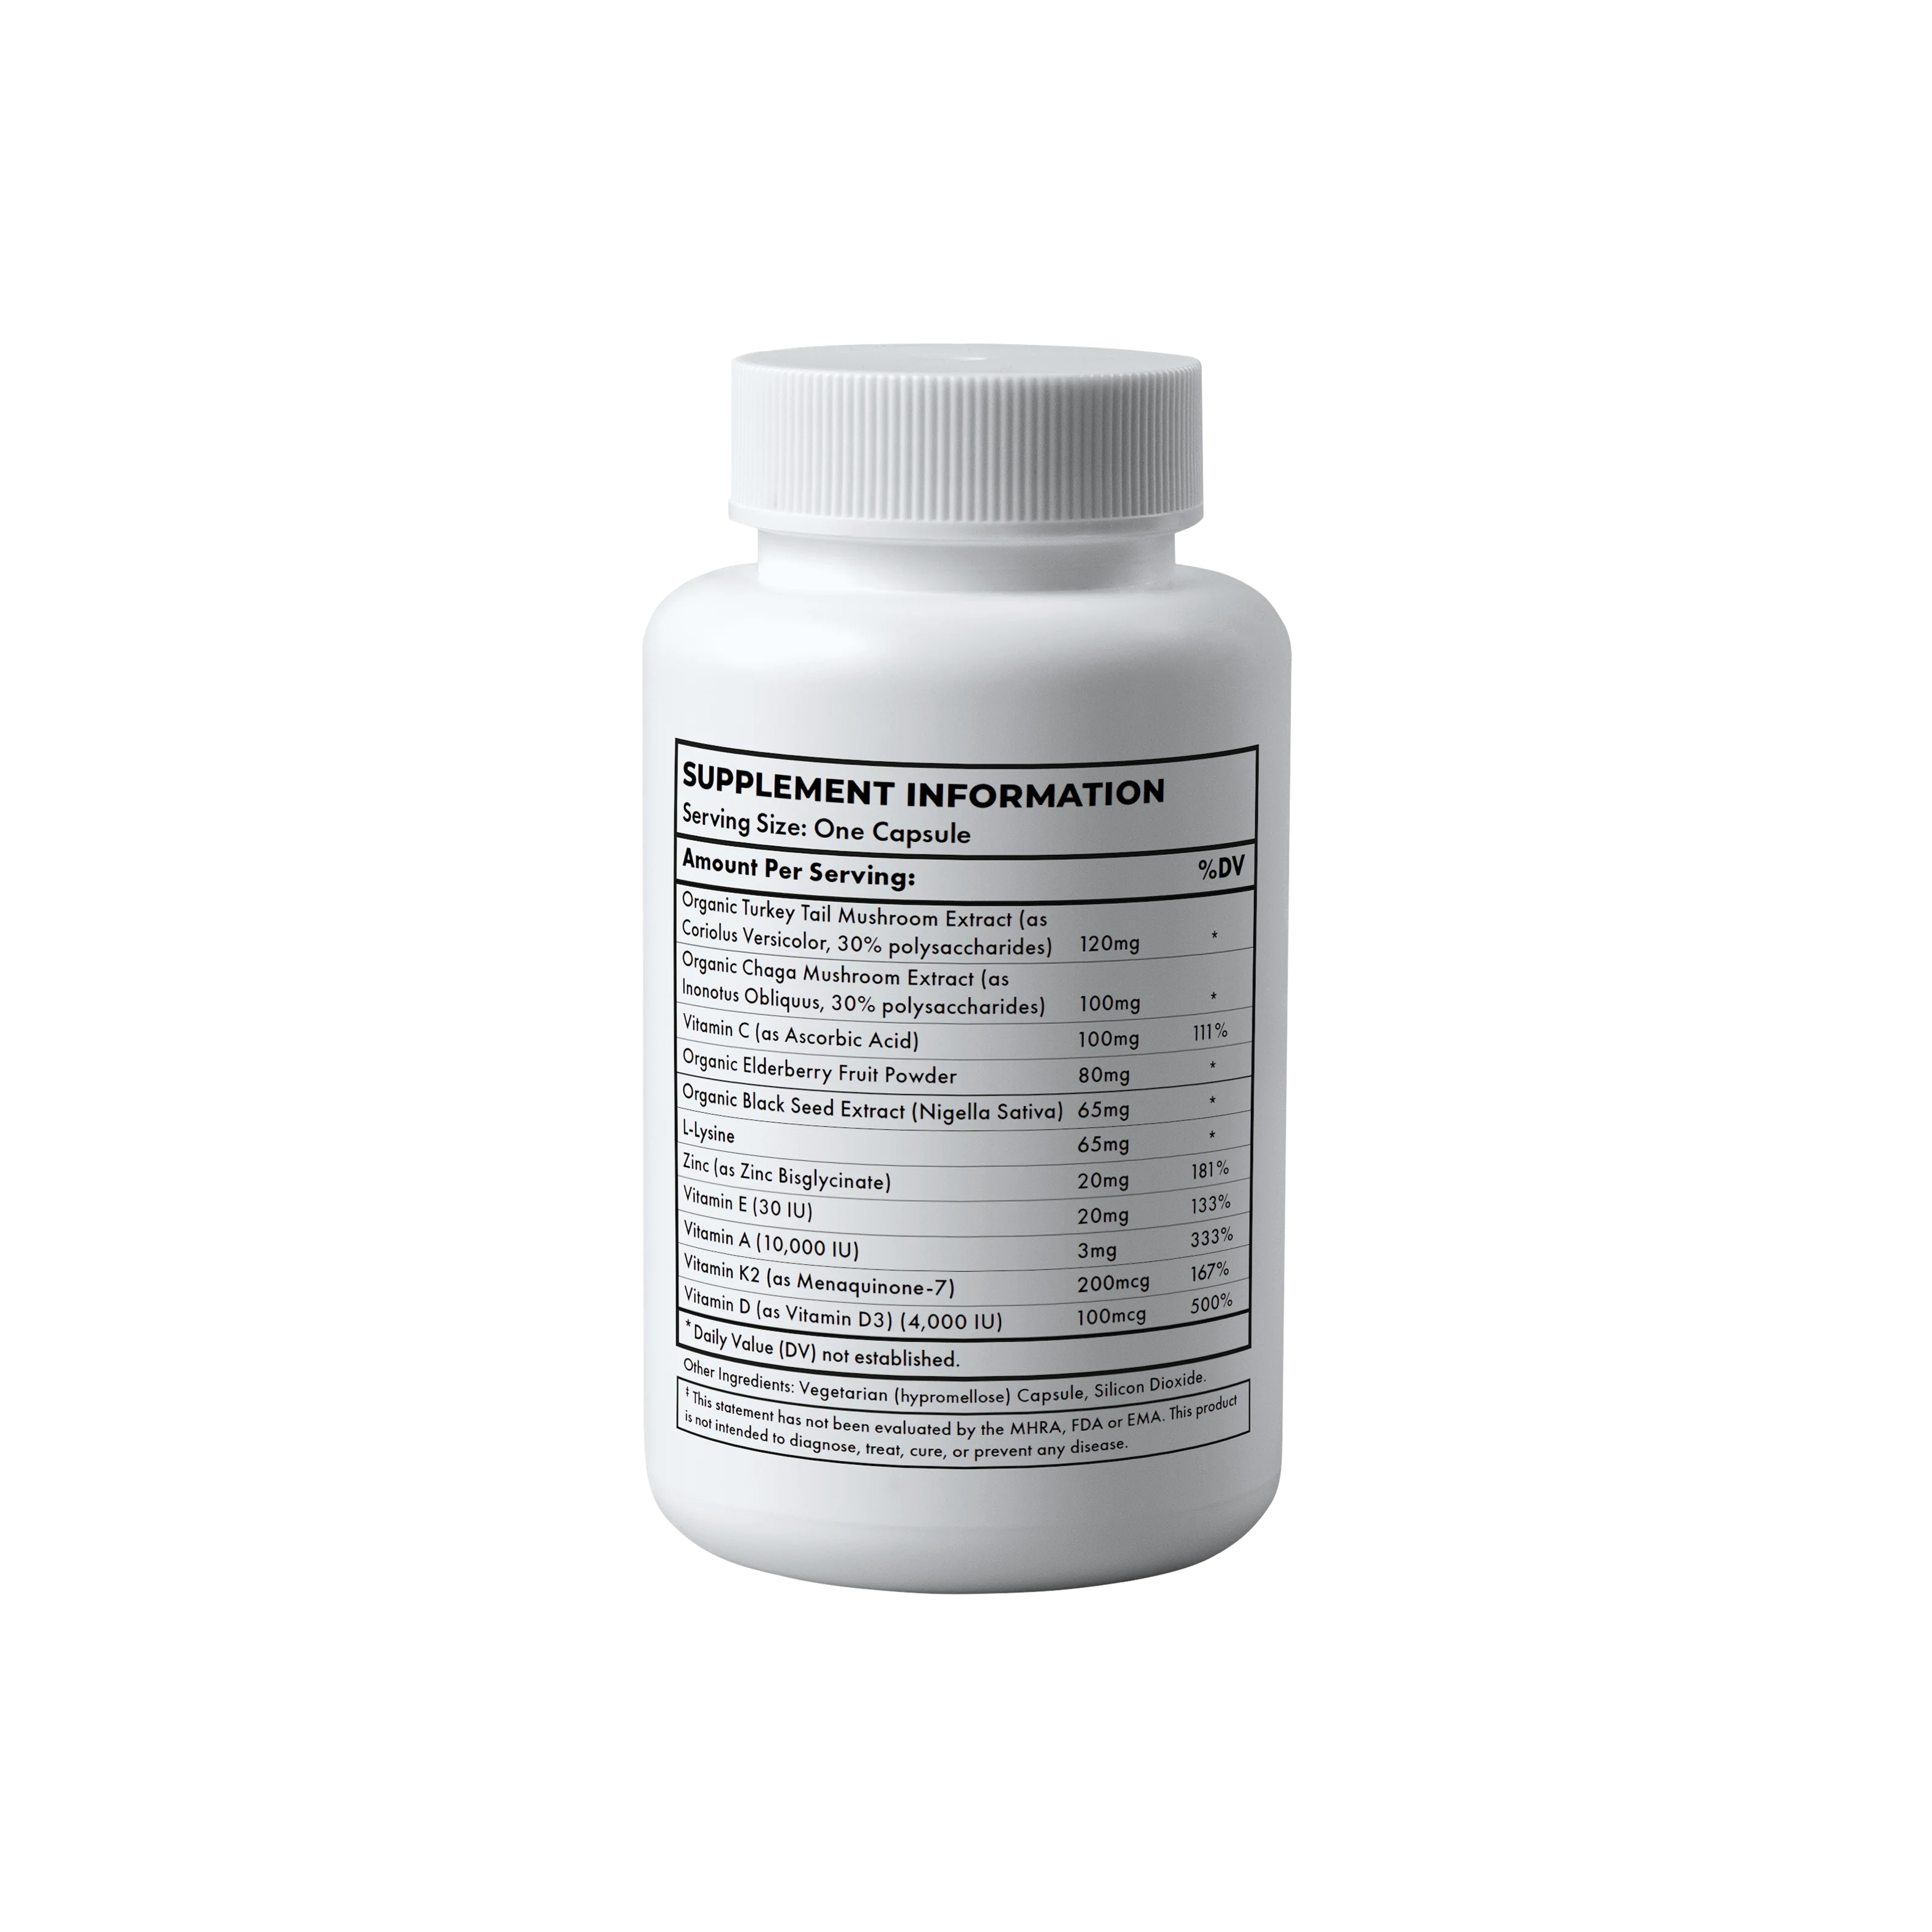 Formexc IMMUNE is a vegan, natural supplement for everyday health and performance.